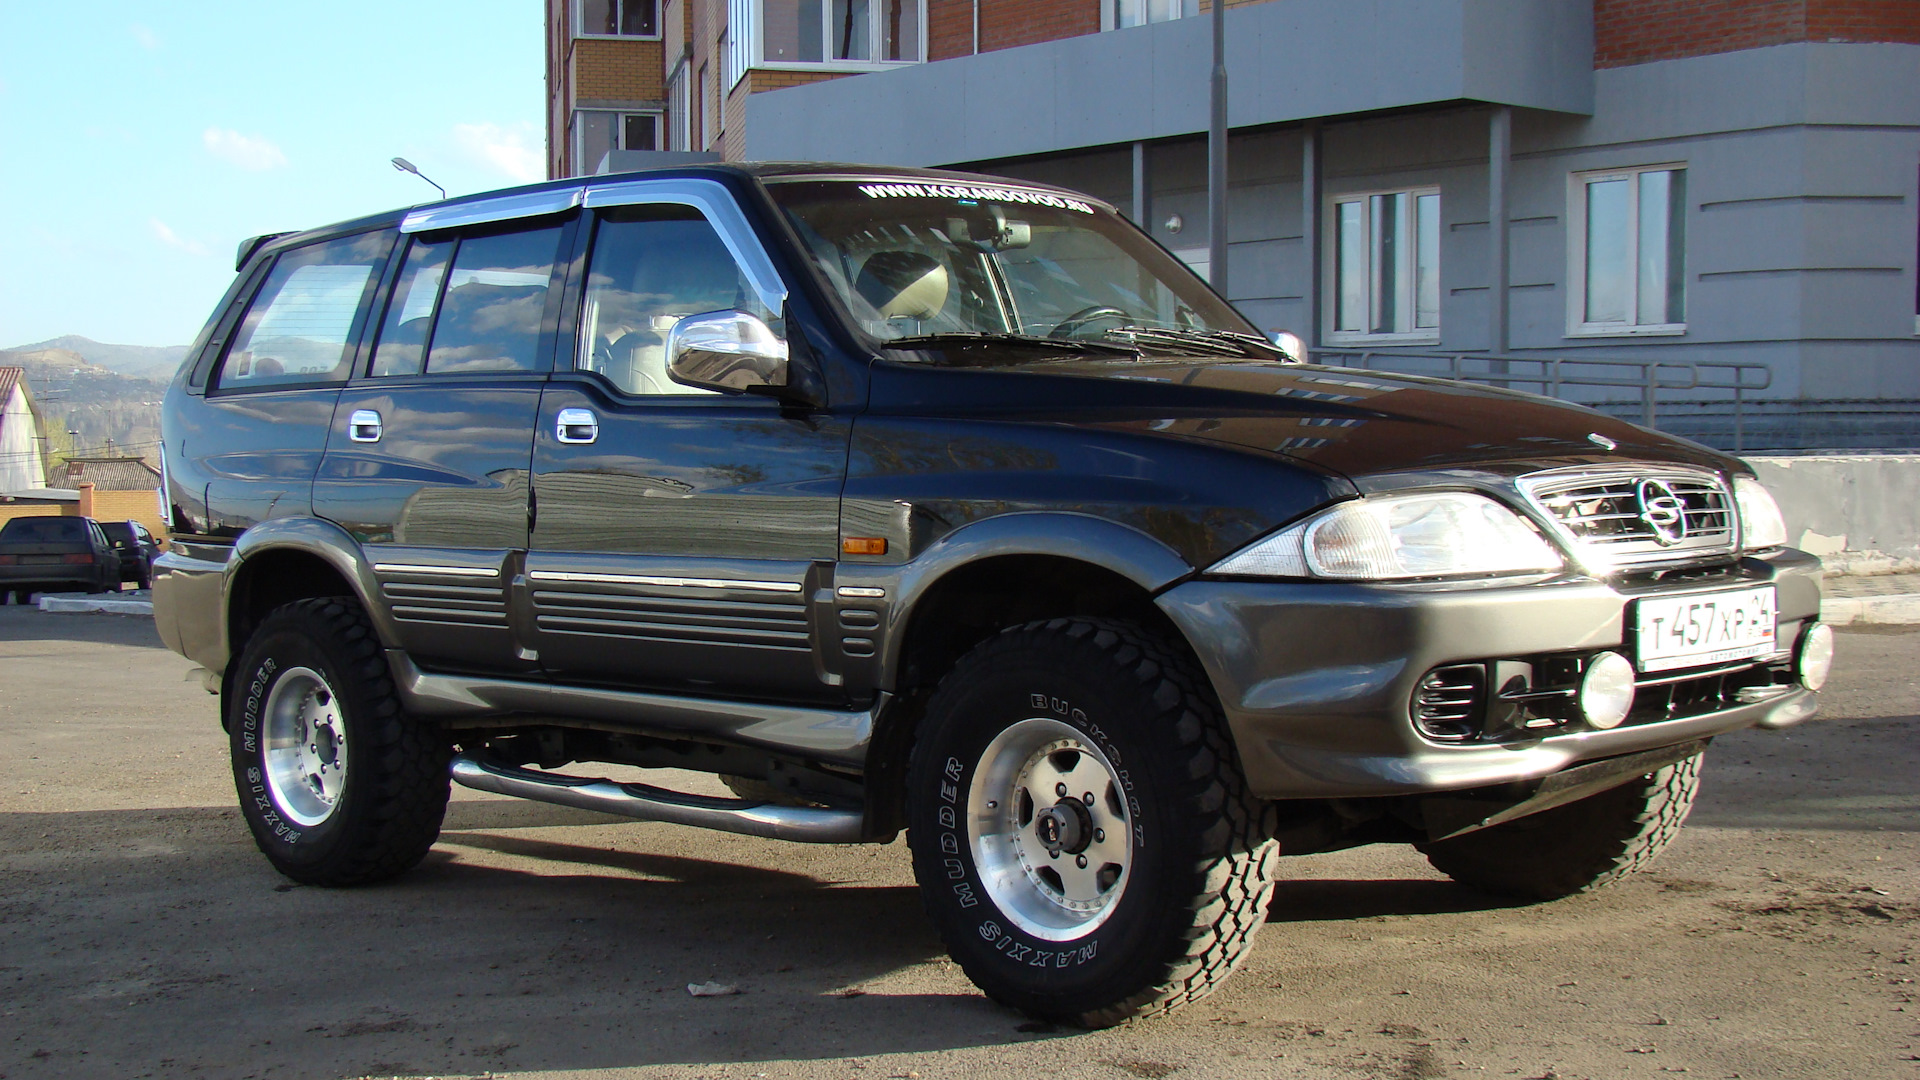 Санг енг муссо б у. Санг енг Муссо. Санг енг Муссо 2005. SSANGYONG Musso 1. SSANGYONG Musso 1995.